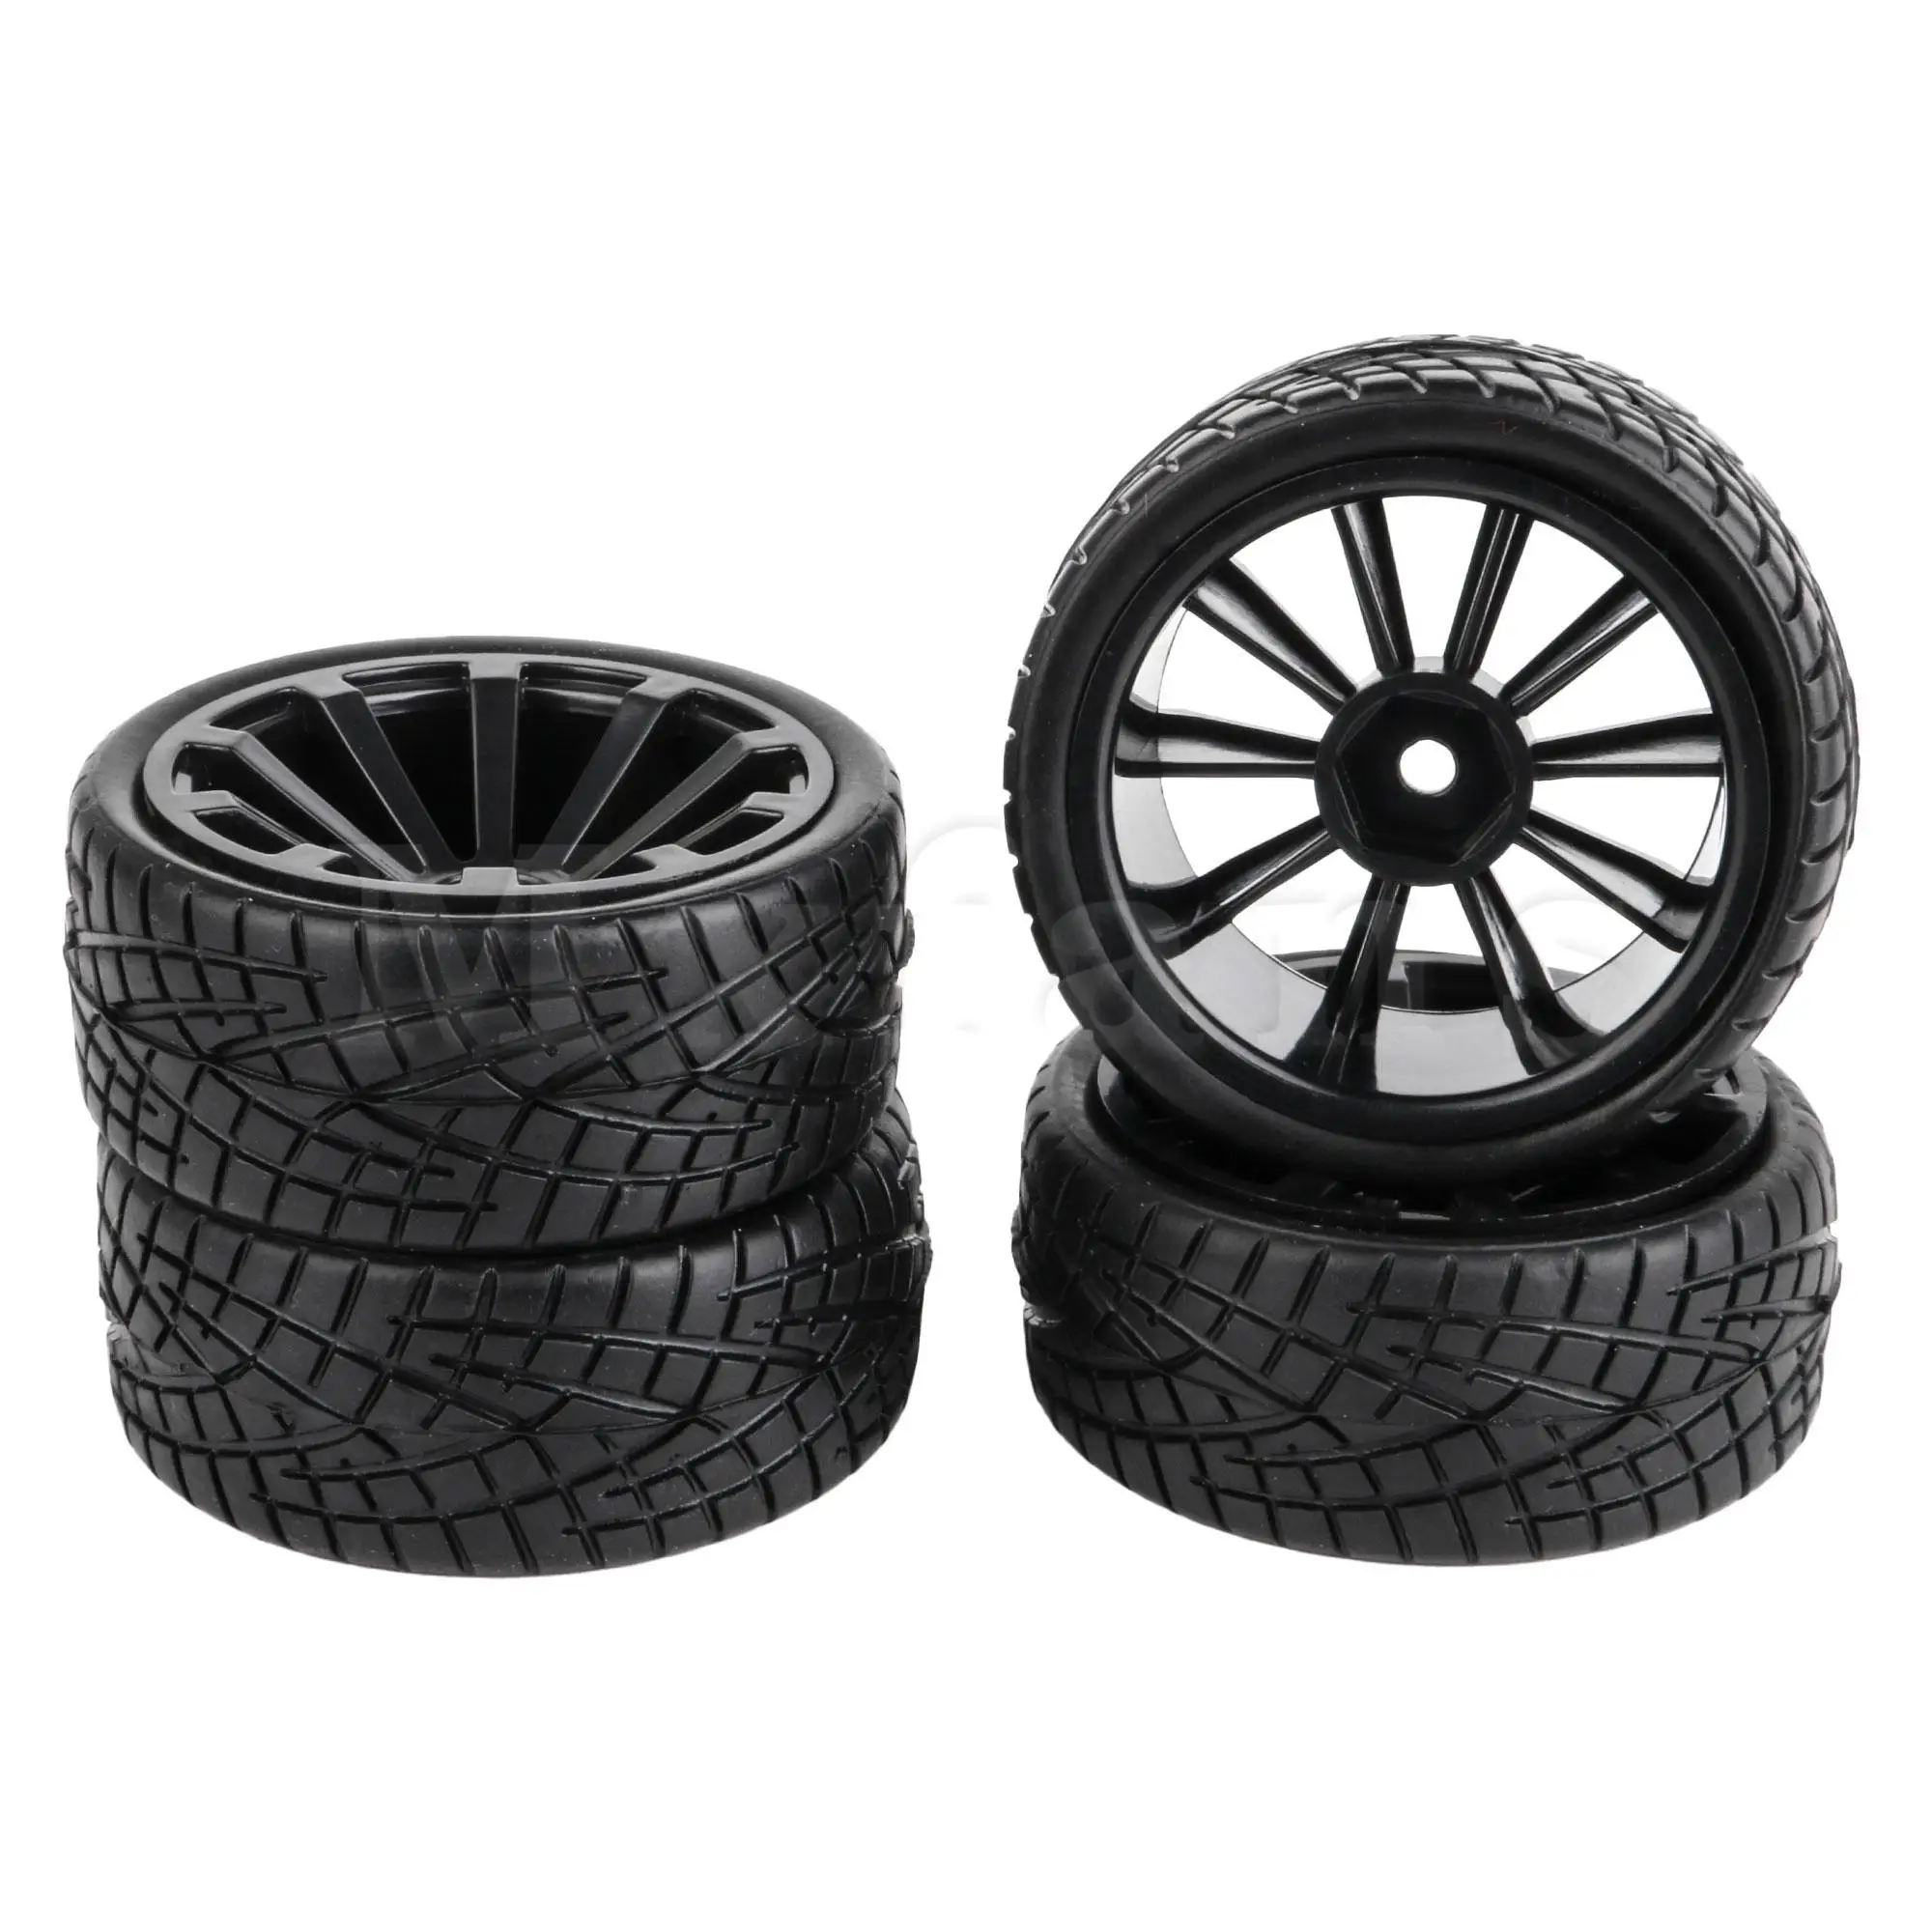 4 Plastic Black Wheel Rims & 4 Rubber Pattern Tyres for RC 1:10 On Road Car